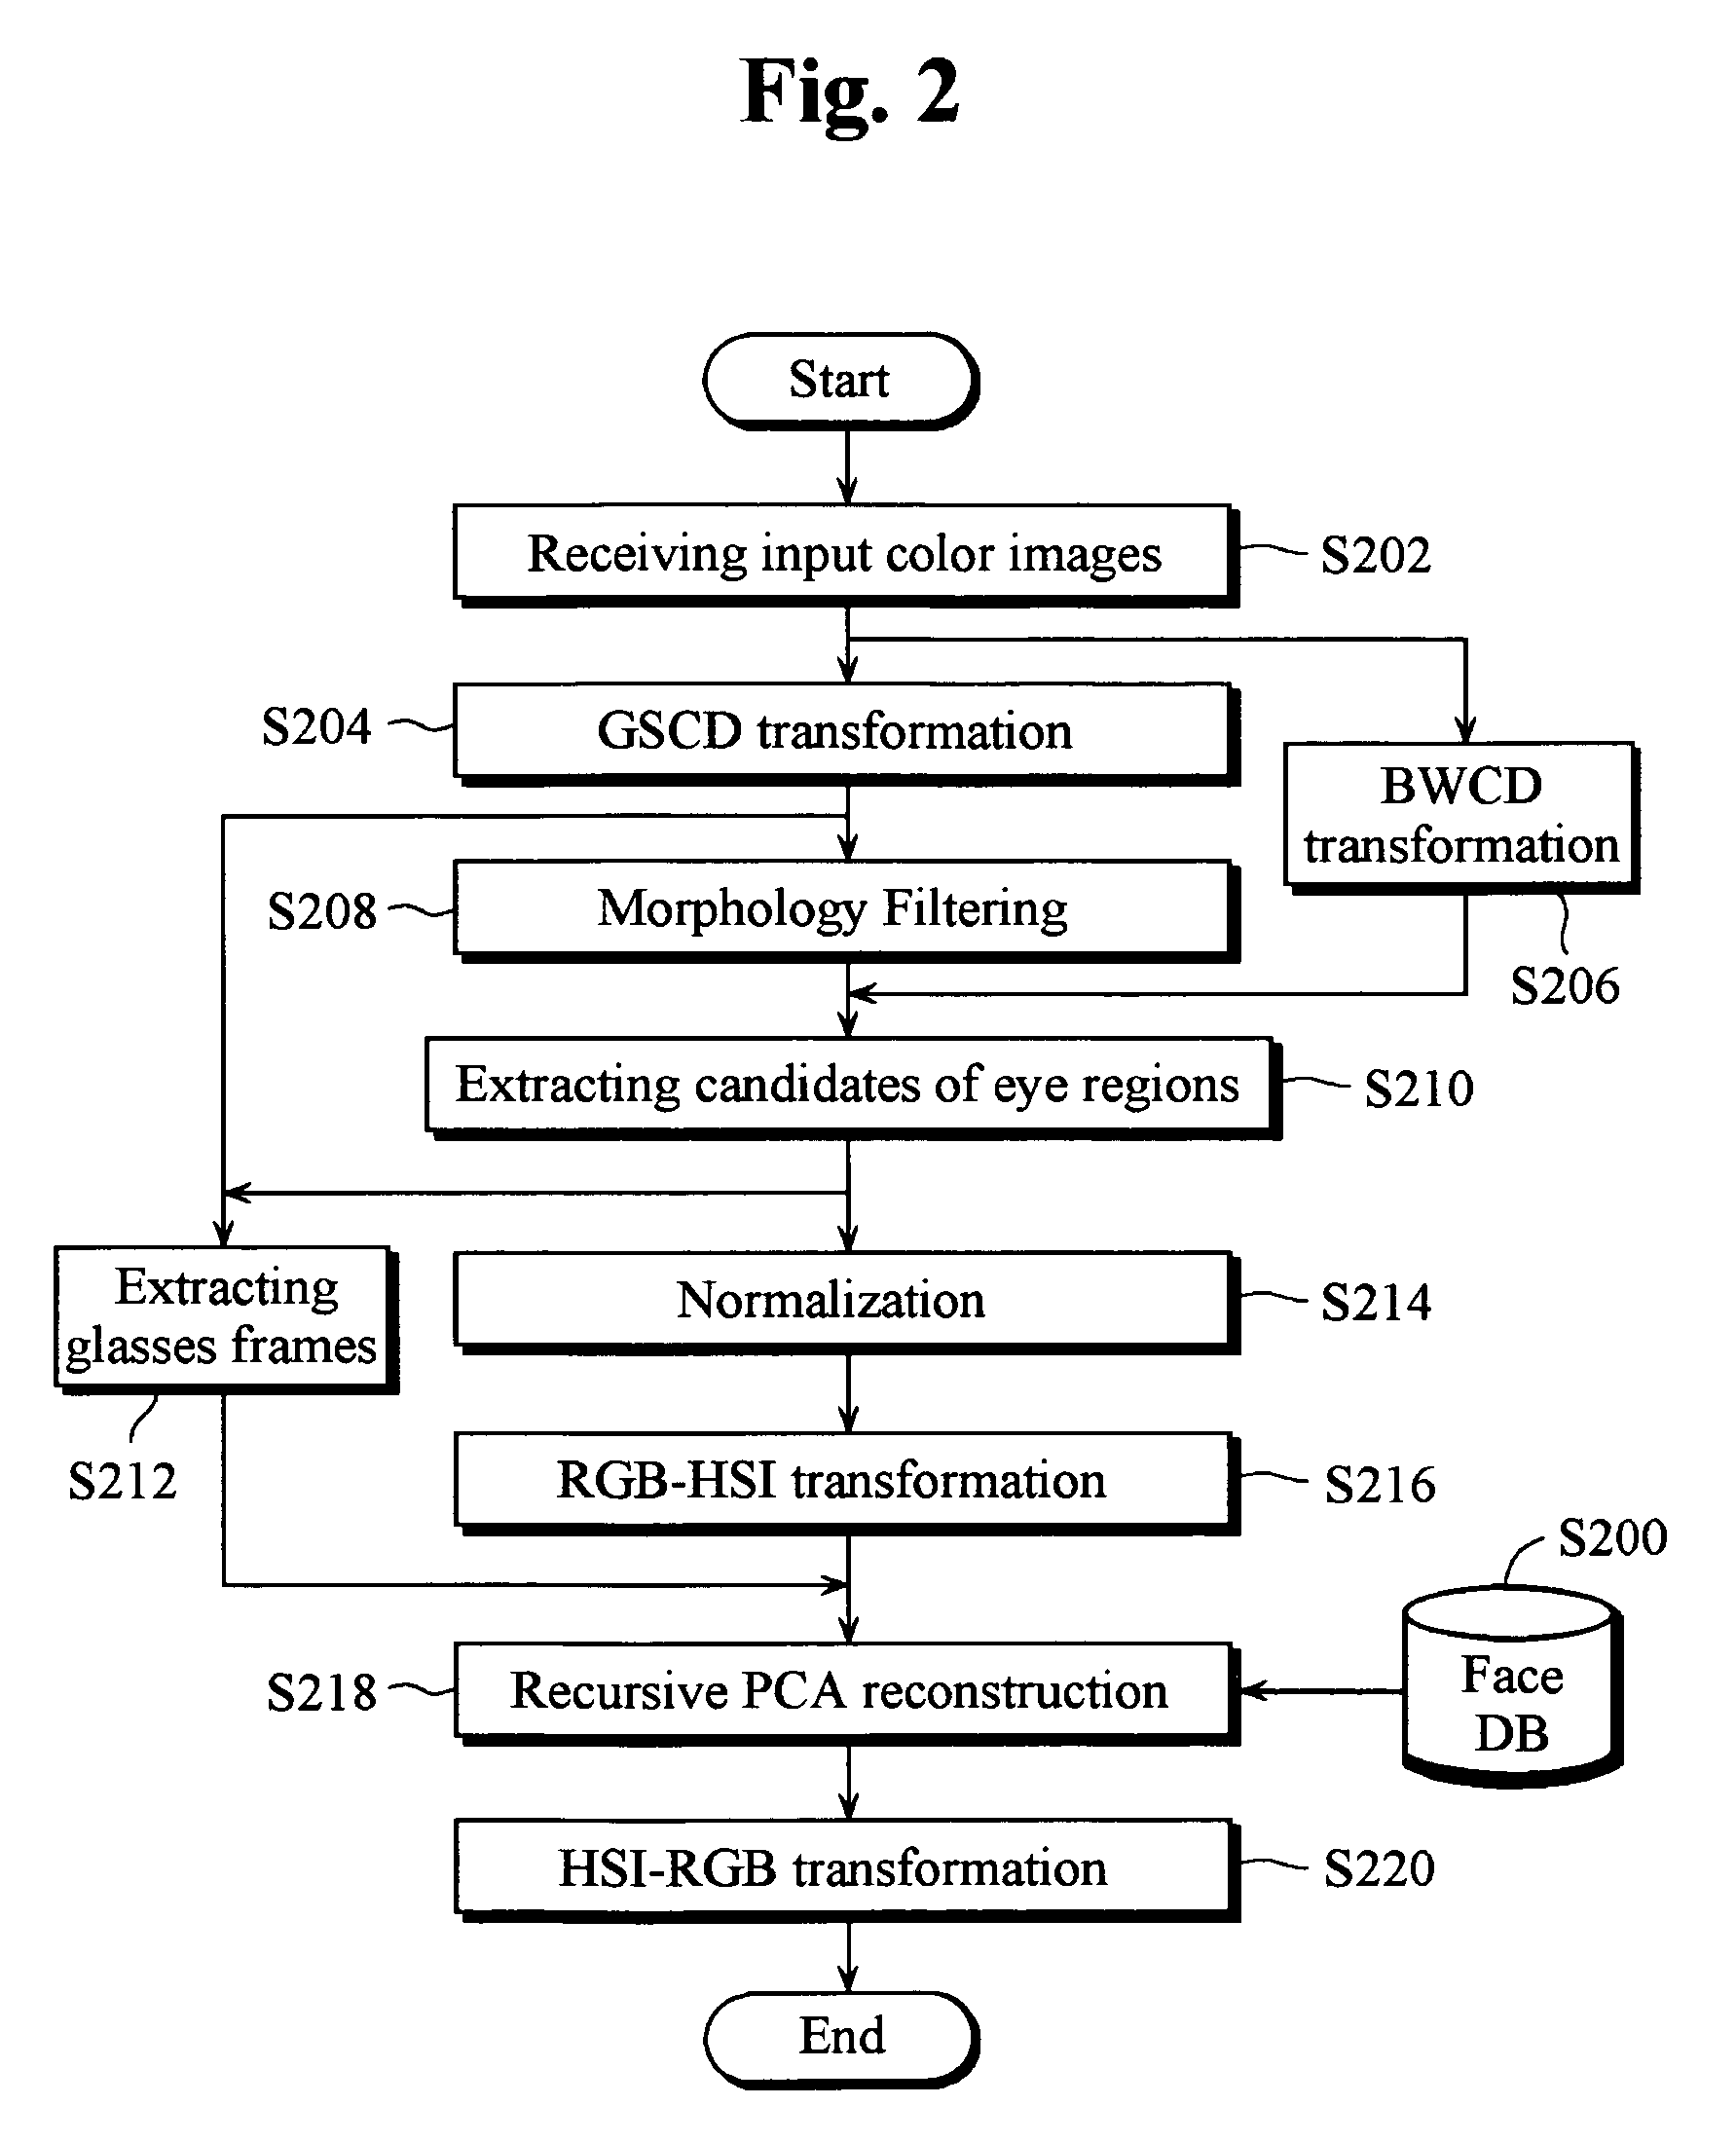 Image processing method for removing glasses from color facial images